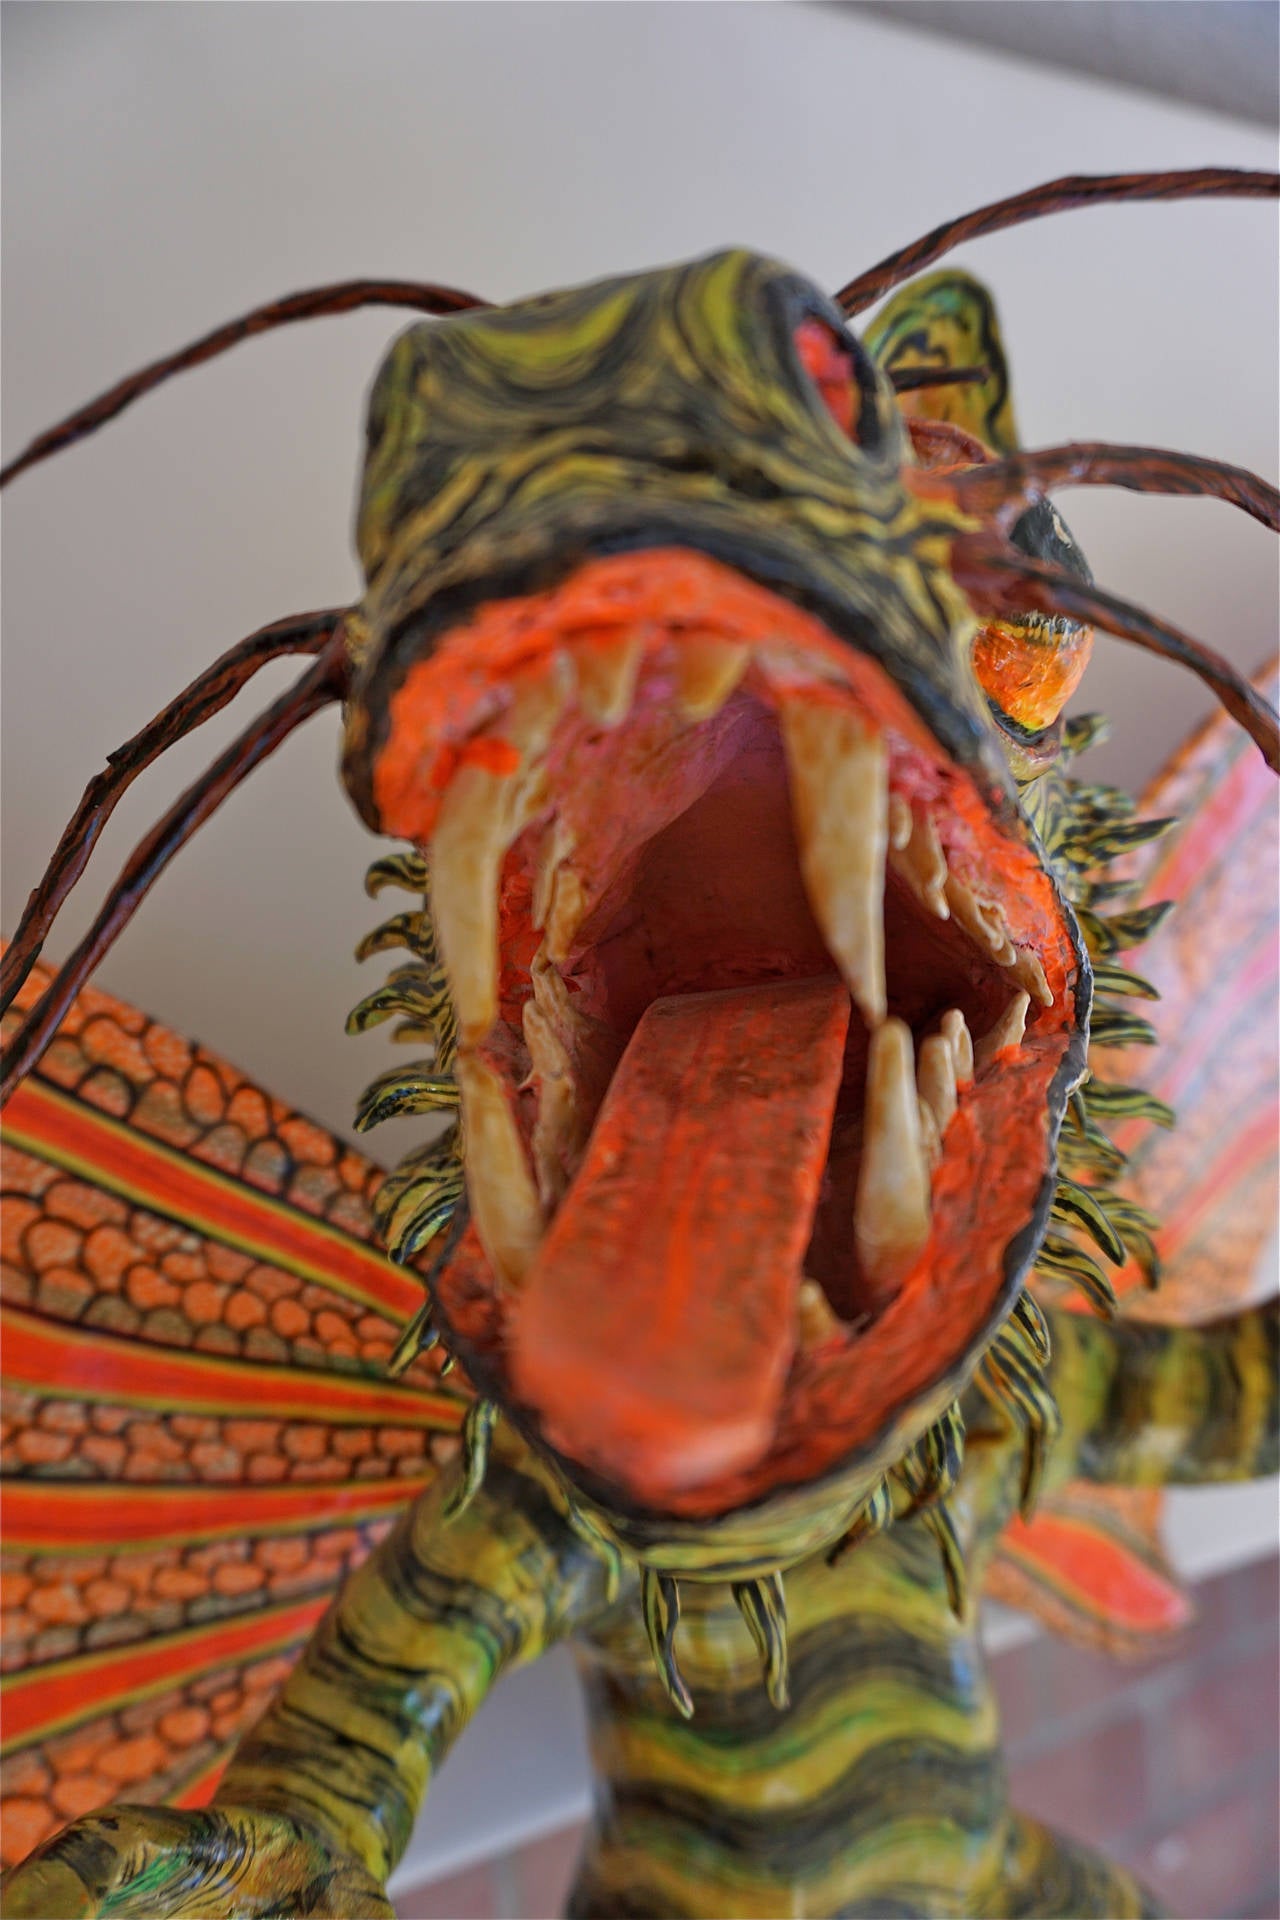 The history of paper mâché in Mexico goes back to the 18th century but was revolutionized by Pedro Linares and his fantastical creatures. After his death his son, Felipe, carried on the family tradition.
The work of Felipe Linares can be found in